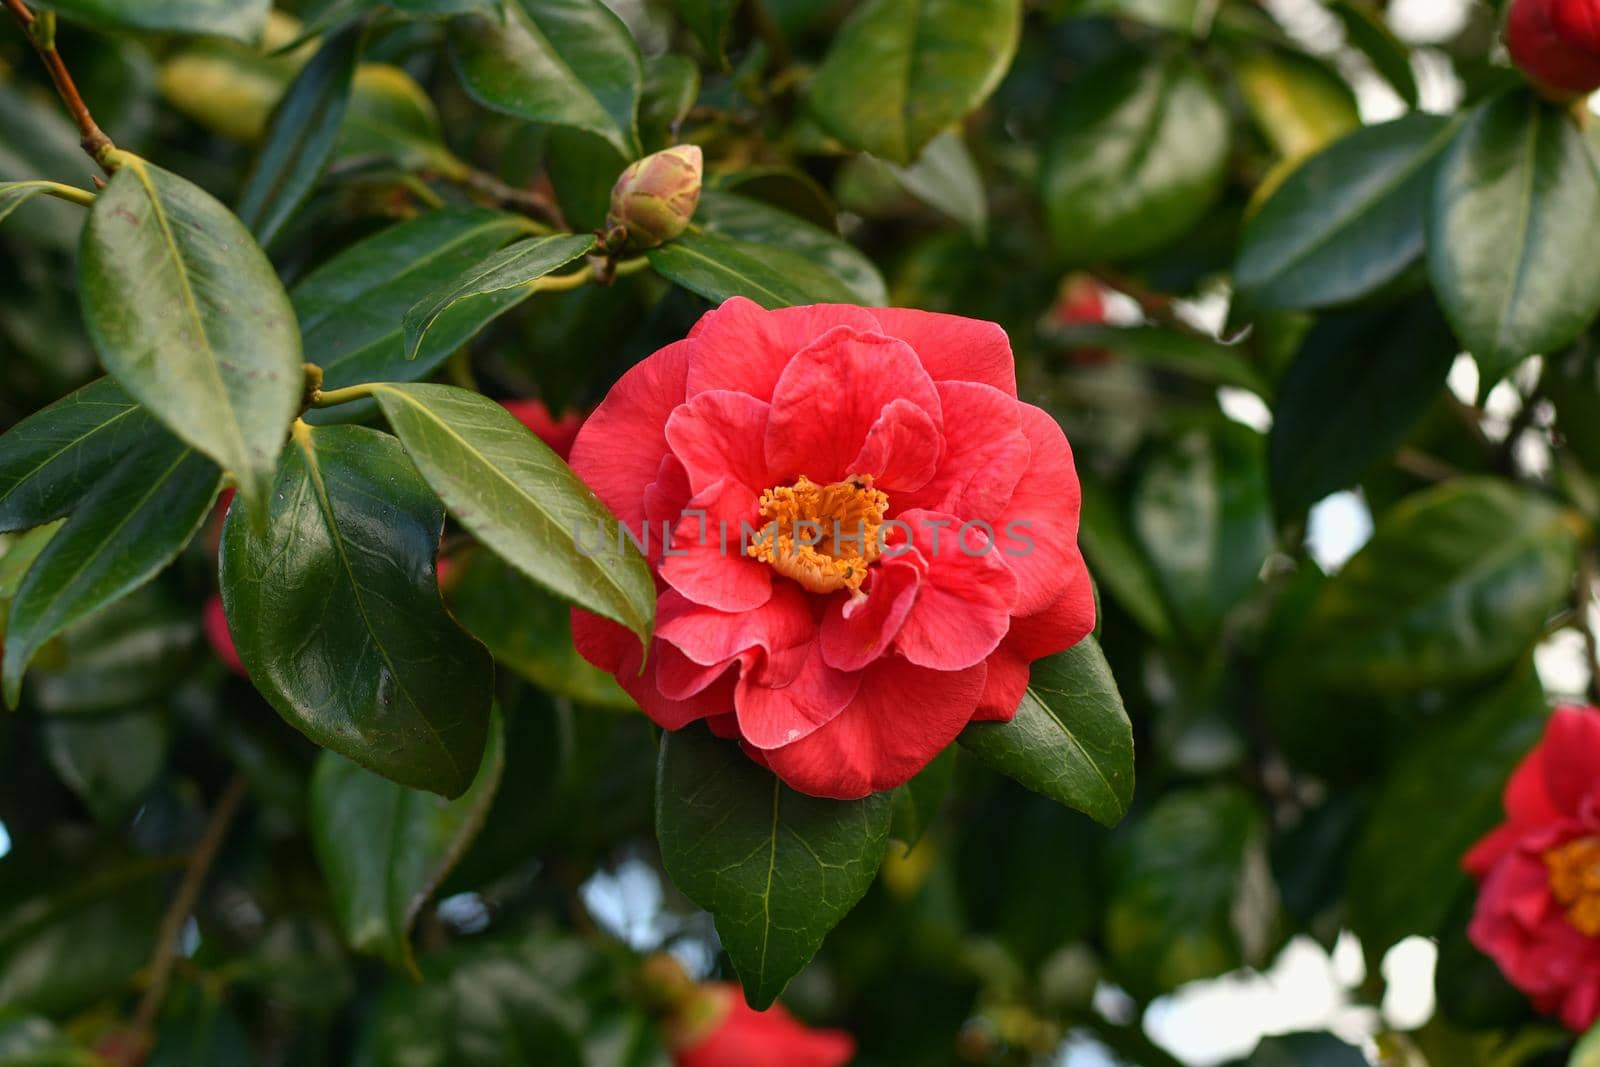 Pink blooming camellia flowers and buds